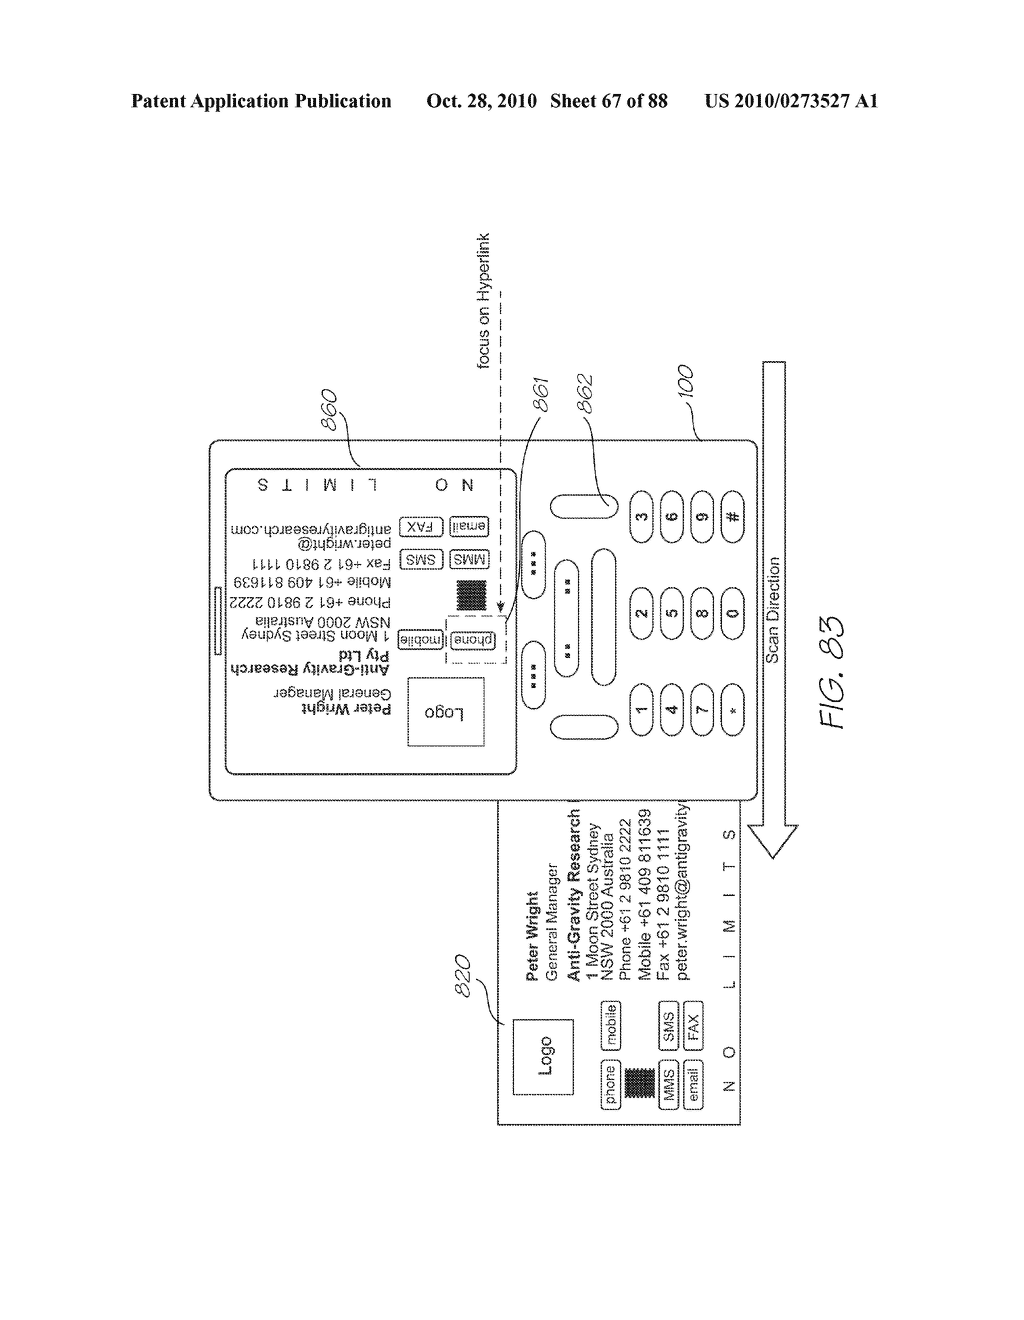 MOBILE PHONE SYSTEM FOR PRINTING WEBPAGE AND RETRIEVING CONTENT - diagram, schematic, and image 68